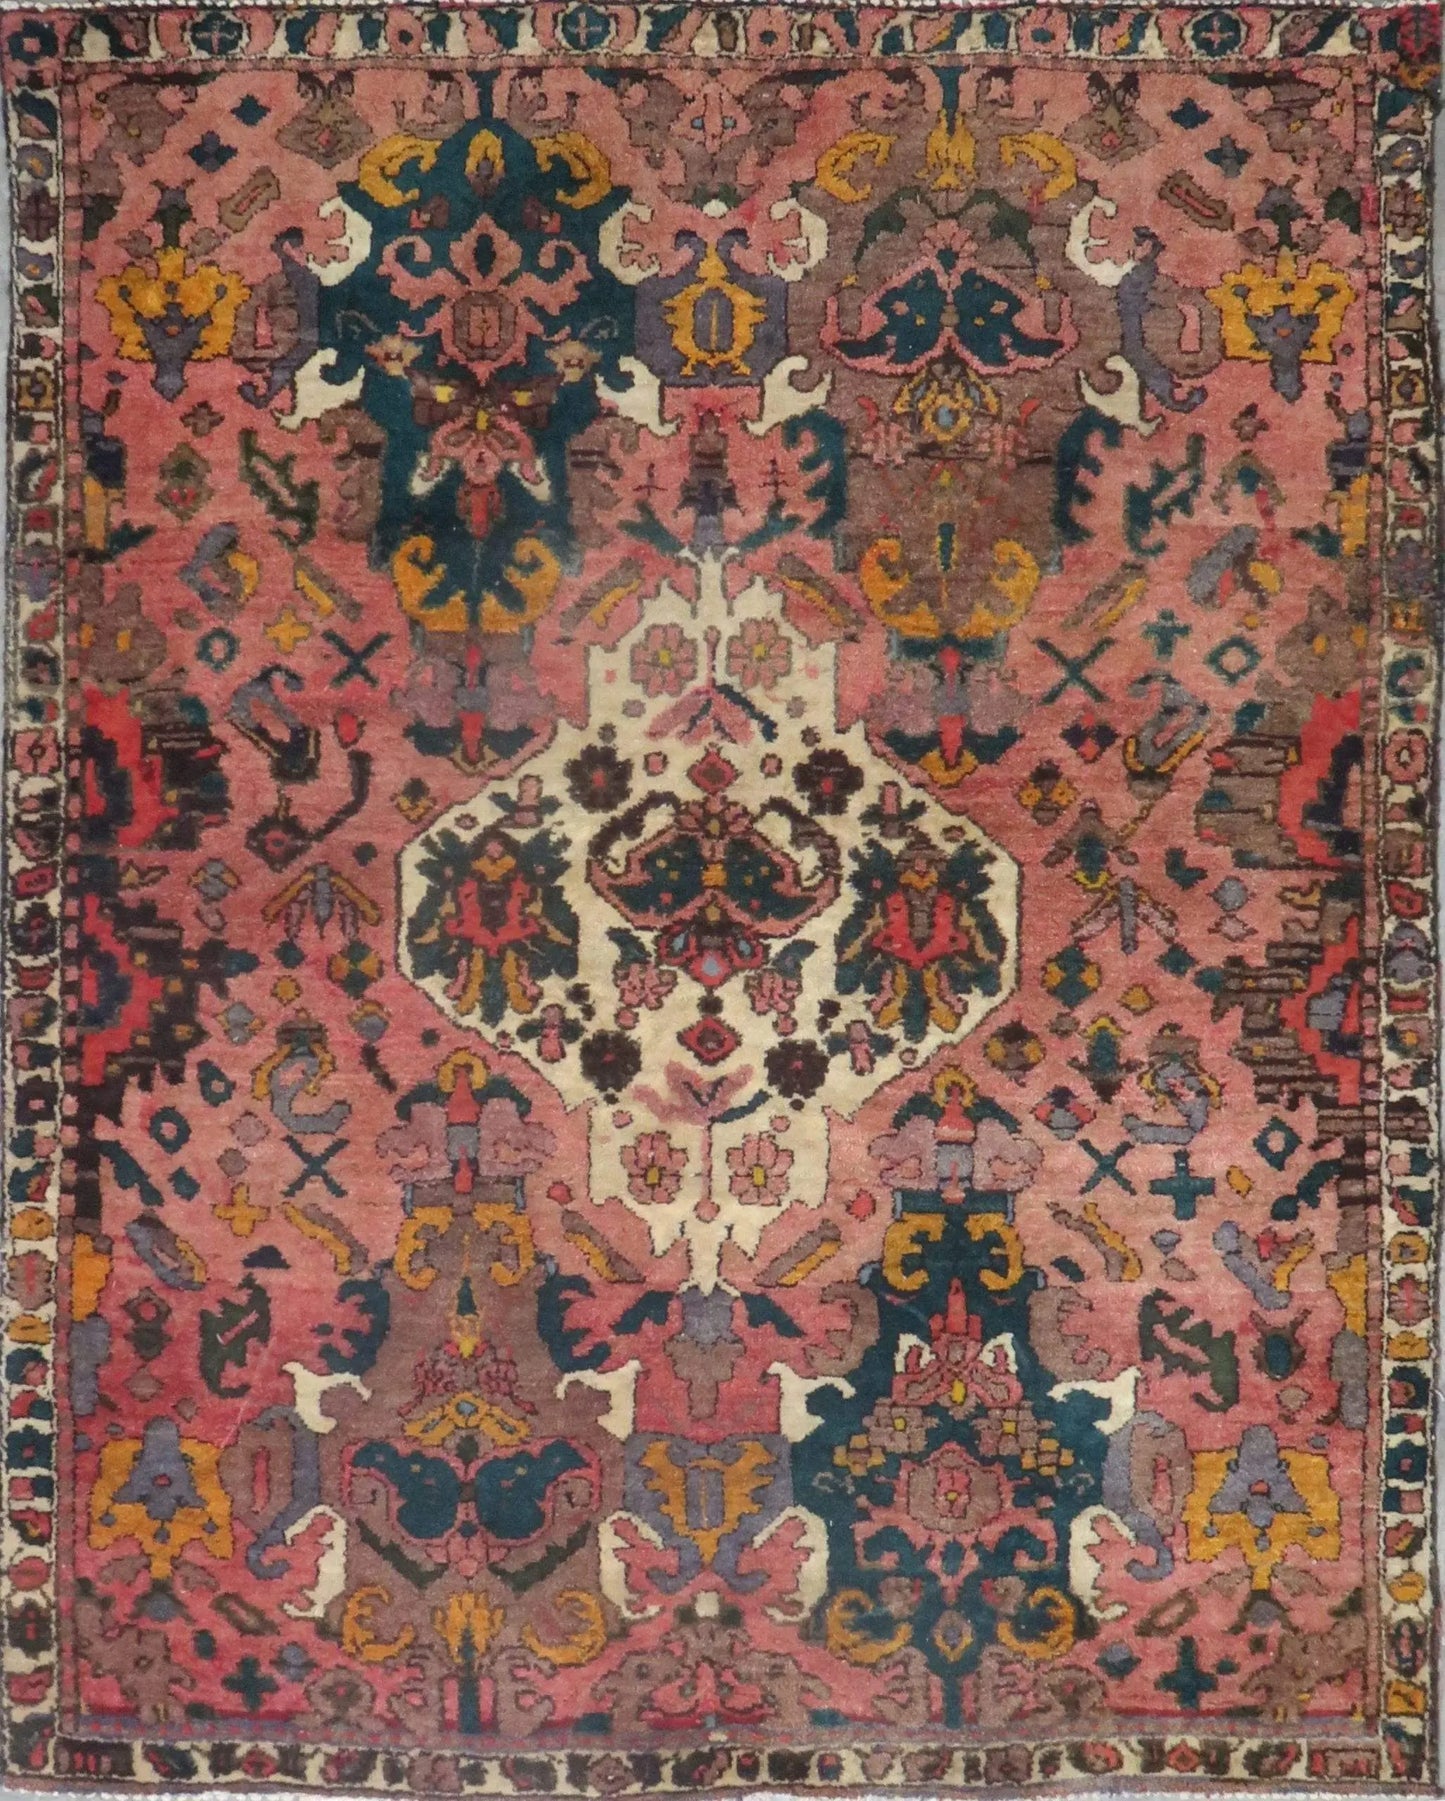 Hand-Knotted Persian Wool Rug _ Luxurious Vintage Design, 5'10" x 4'7", Artisan Crafted